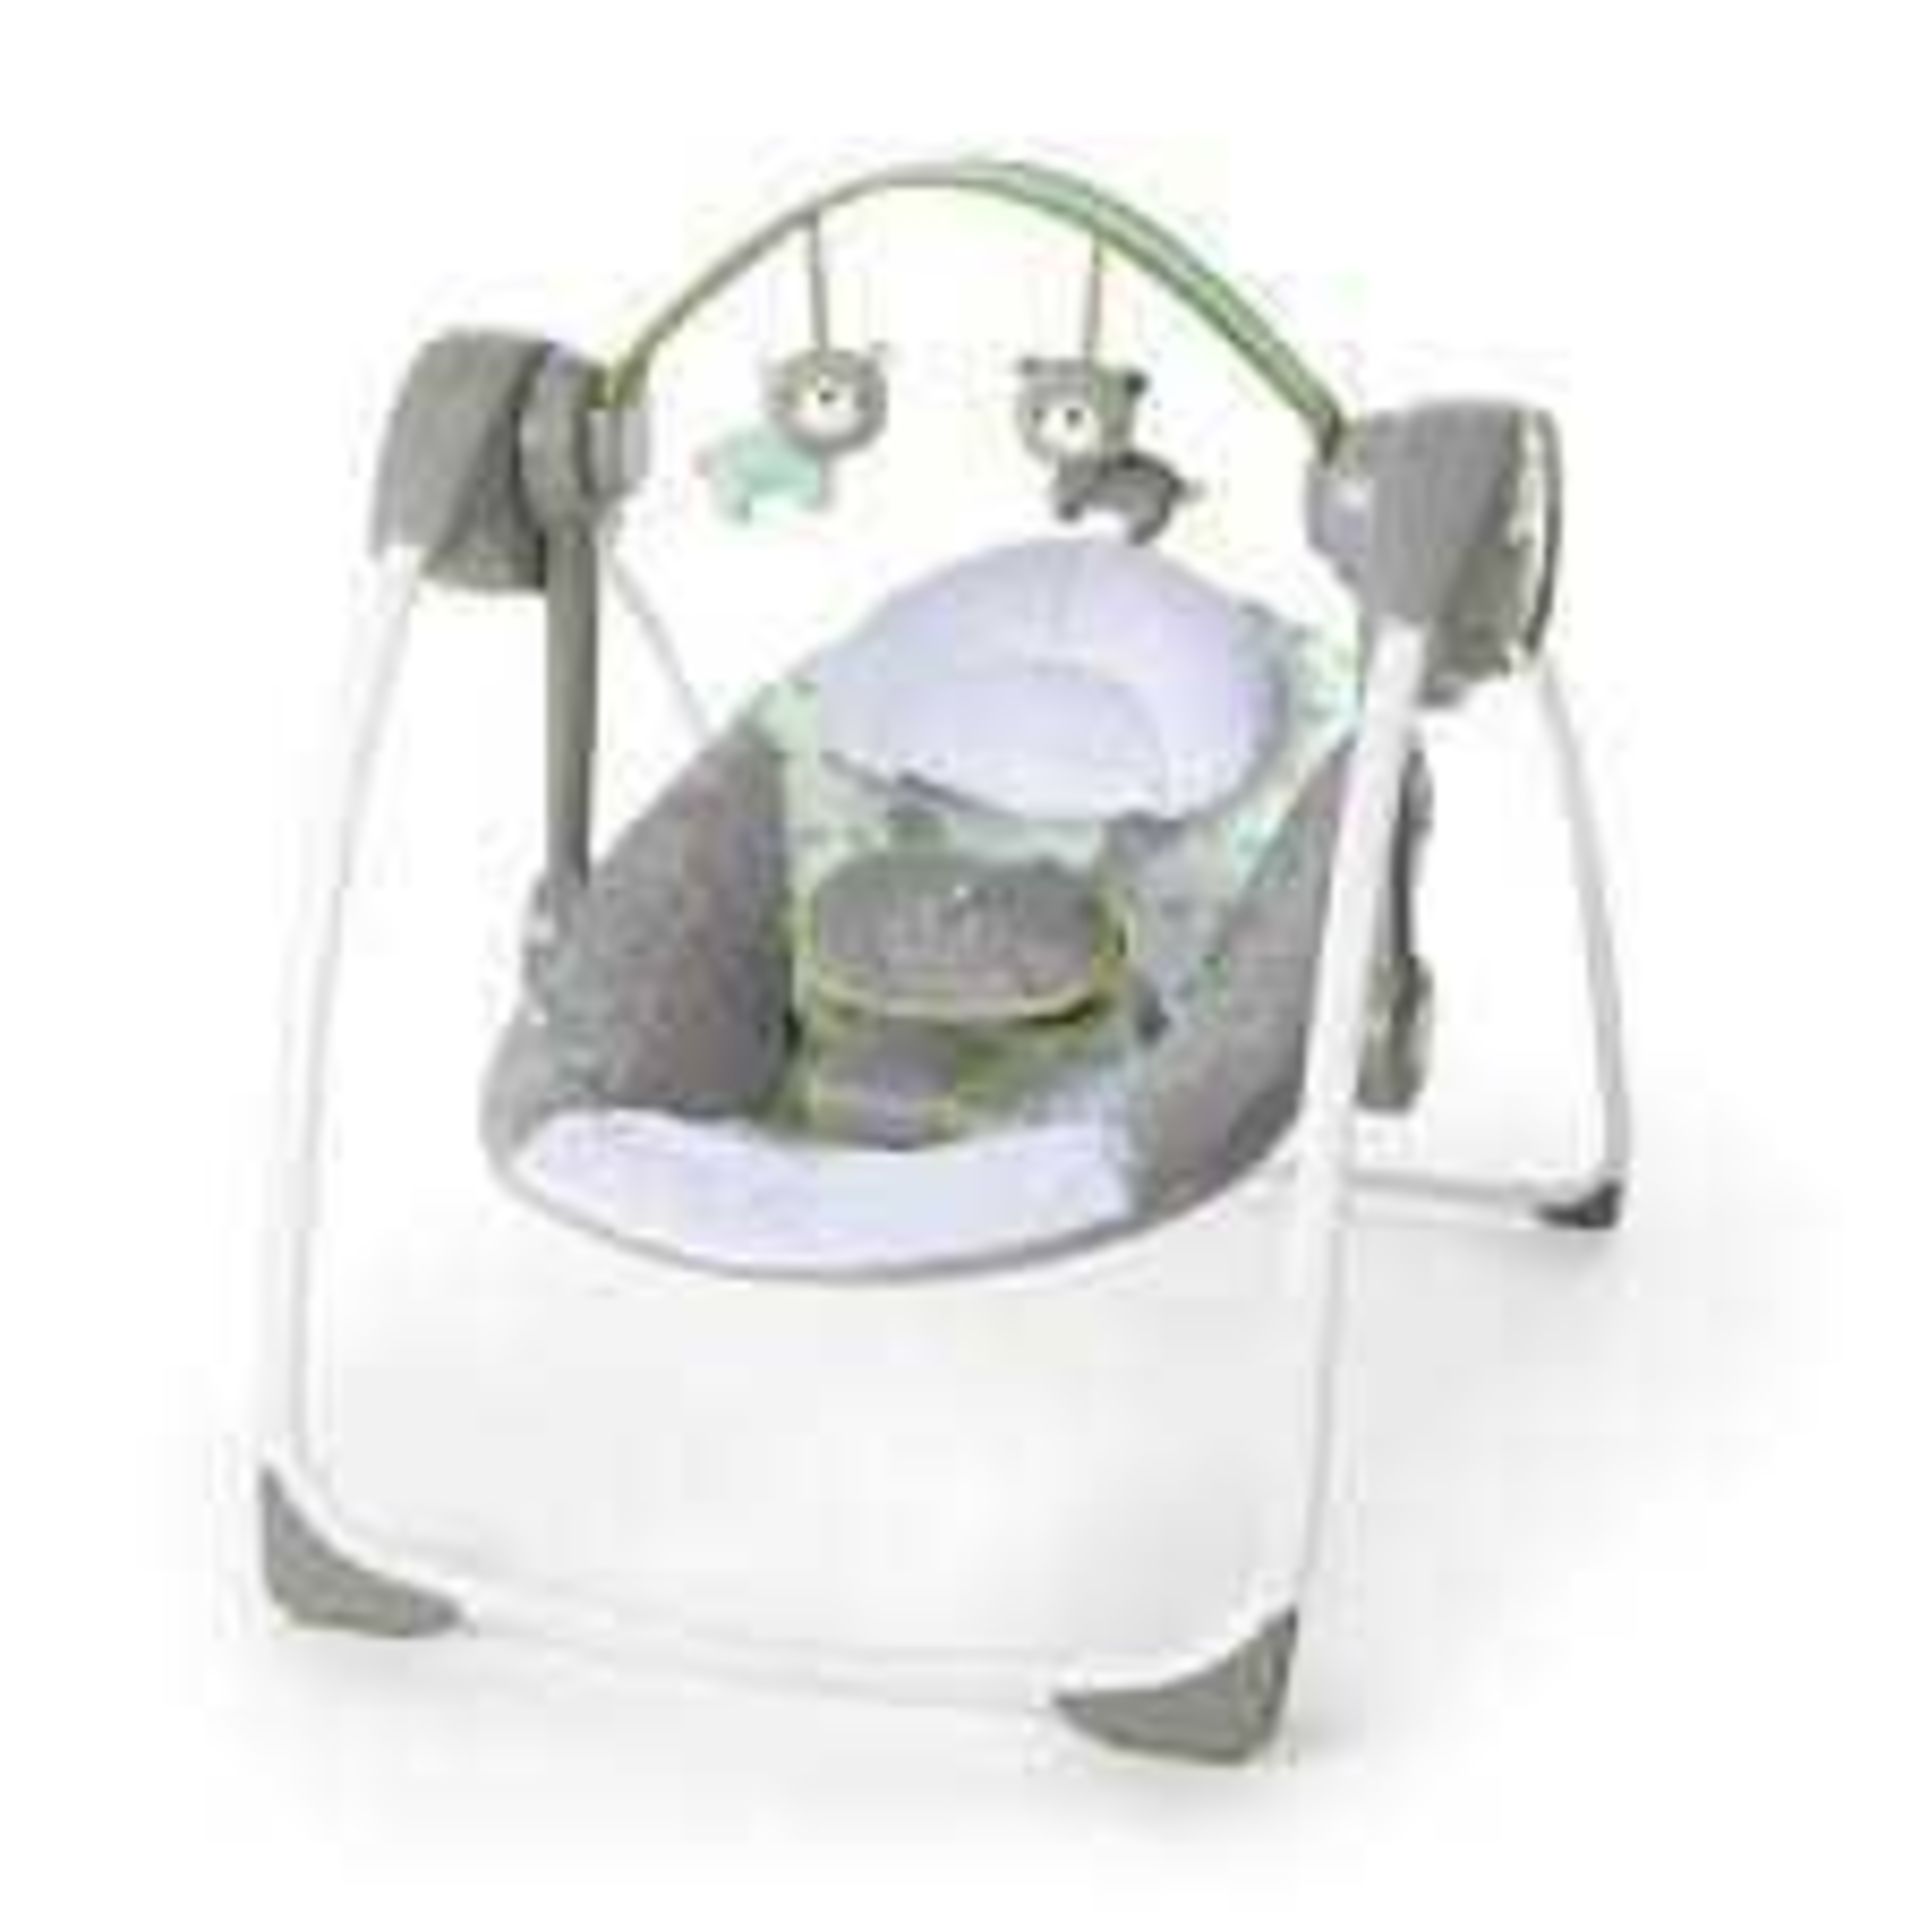 Combined RRP £120 Lot To Contain 2 Boxed Ingenuity Convert Me Swing 2 Seat Portable Swing